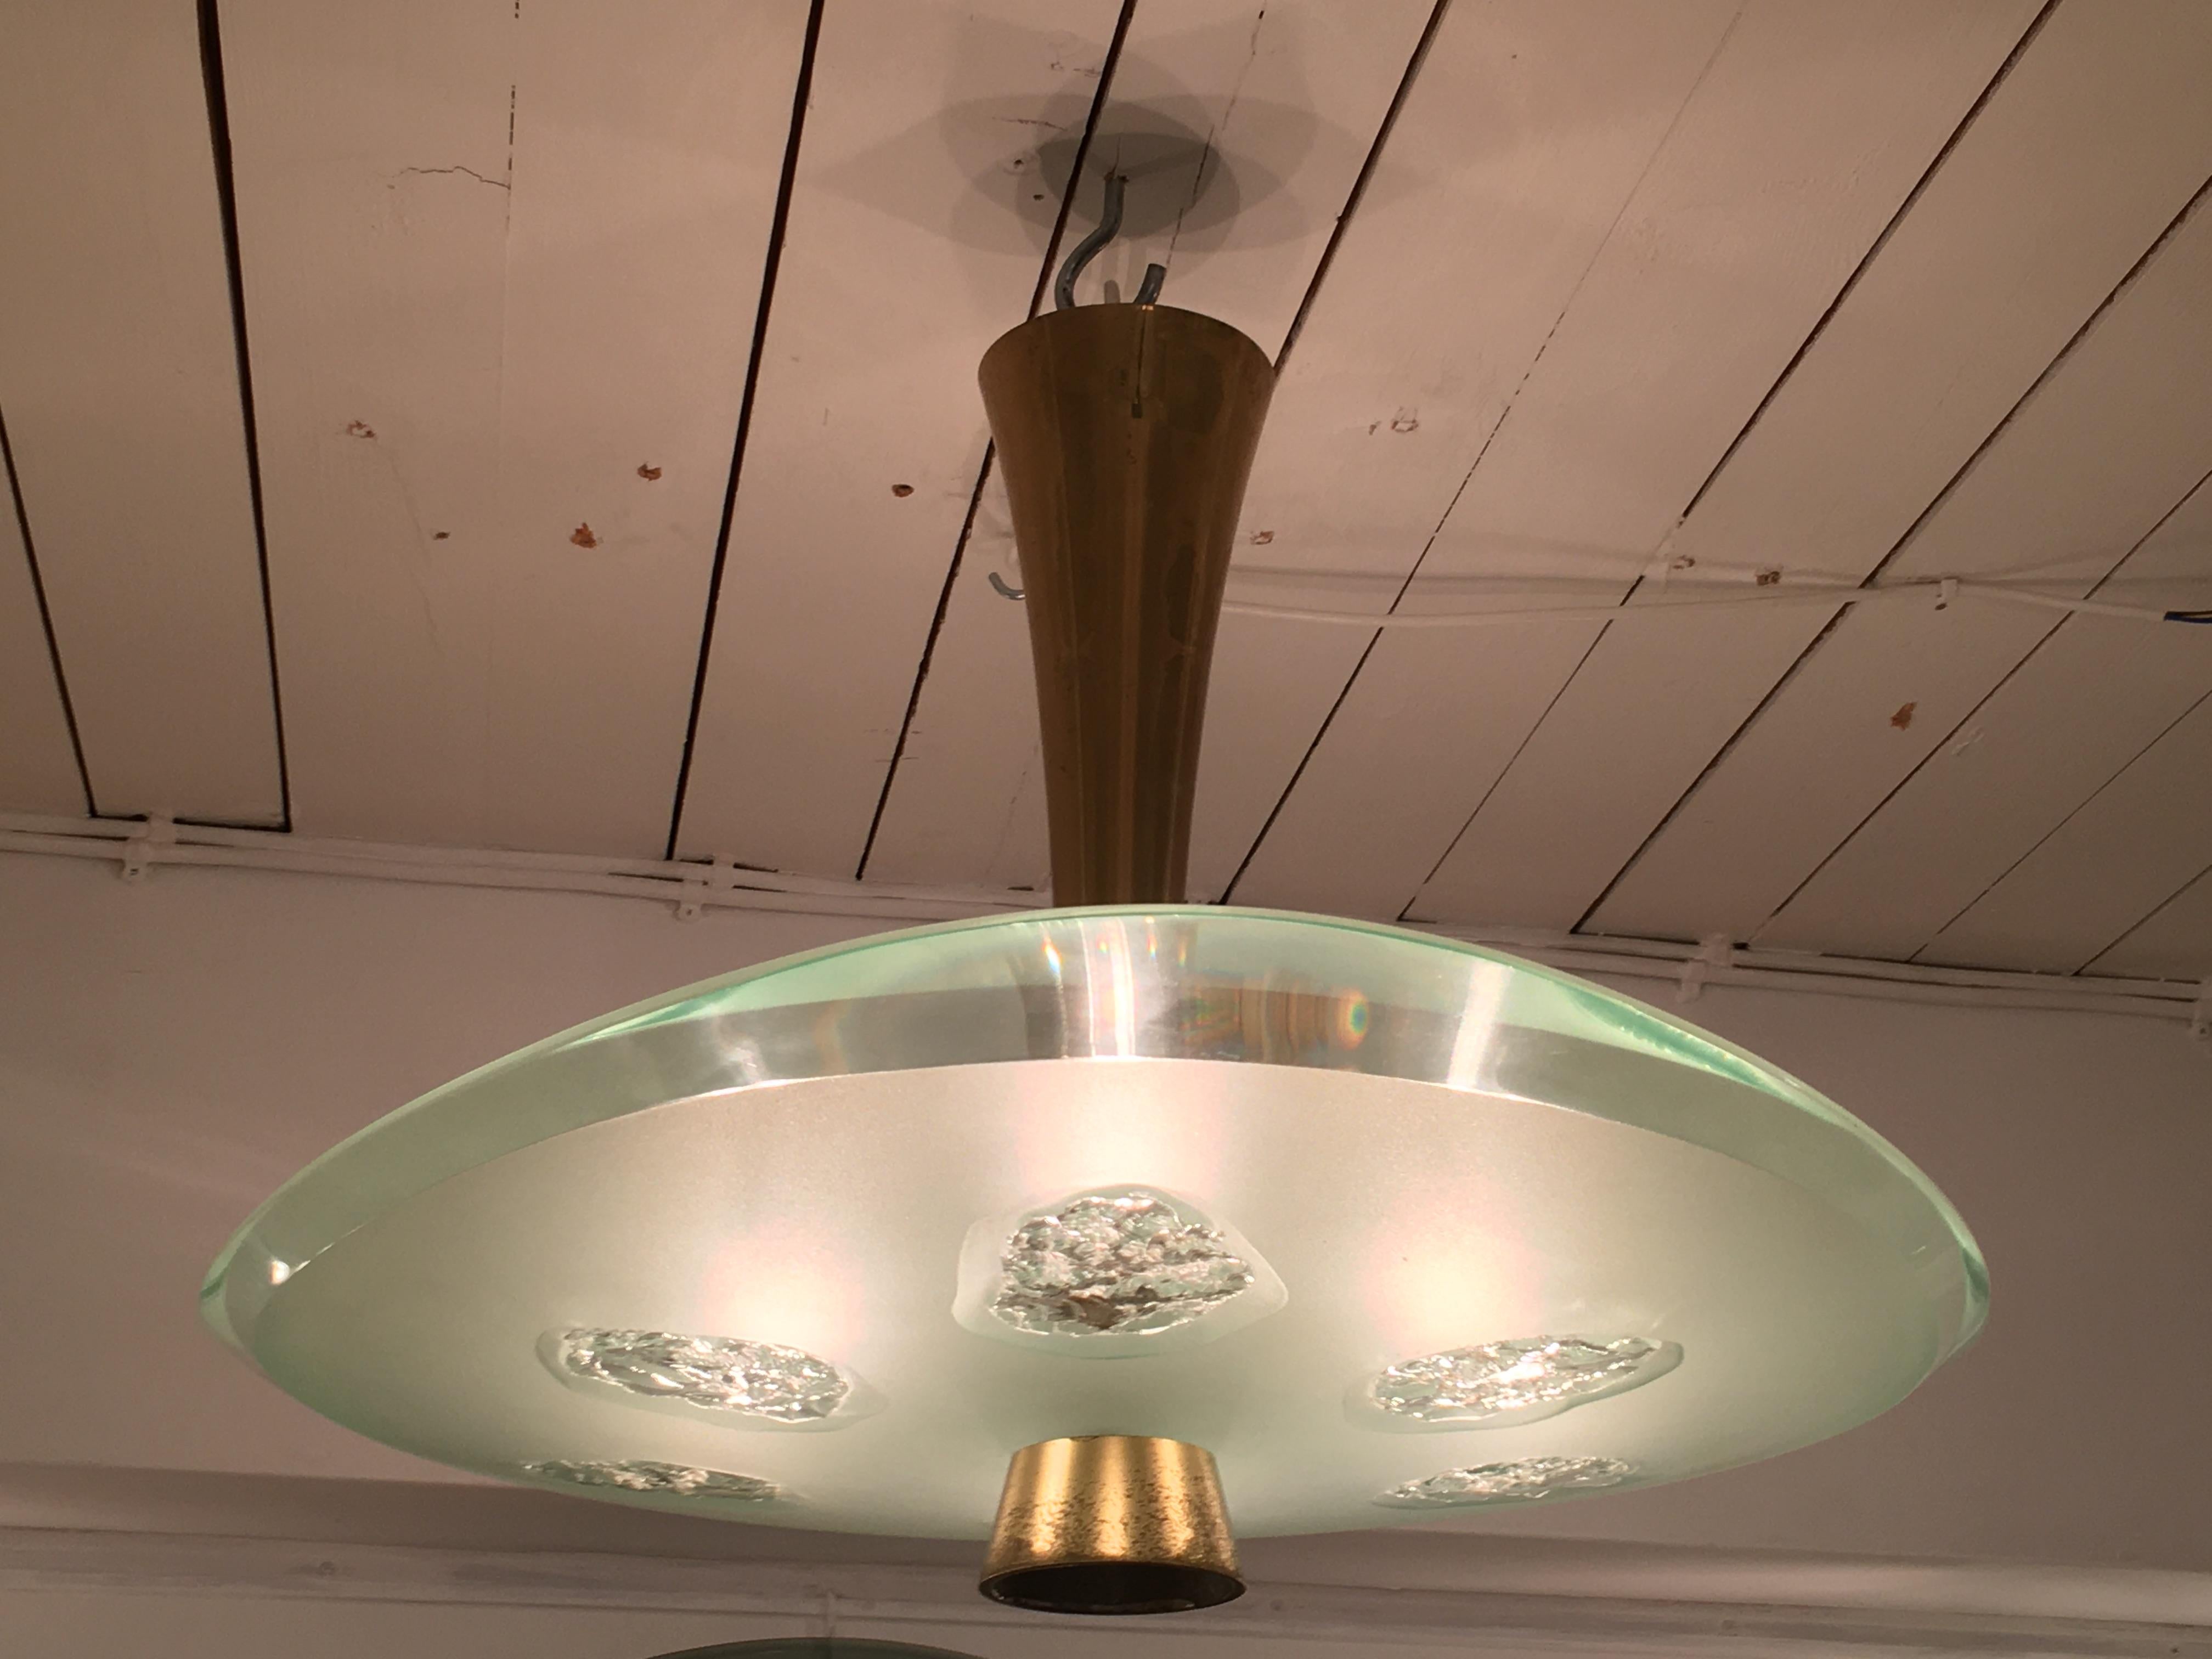 '1748' Model Ceiling Light by Max Ingrand and Dubé for Fontana Arte, Italy, 1957 For Sale 3